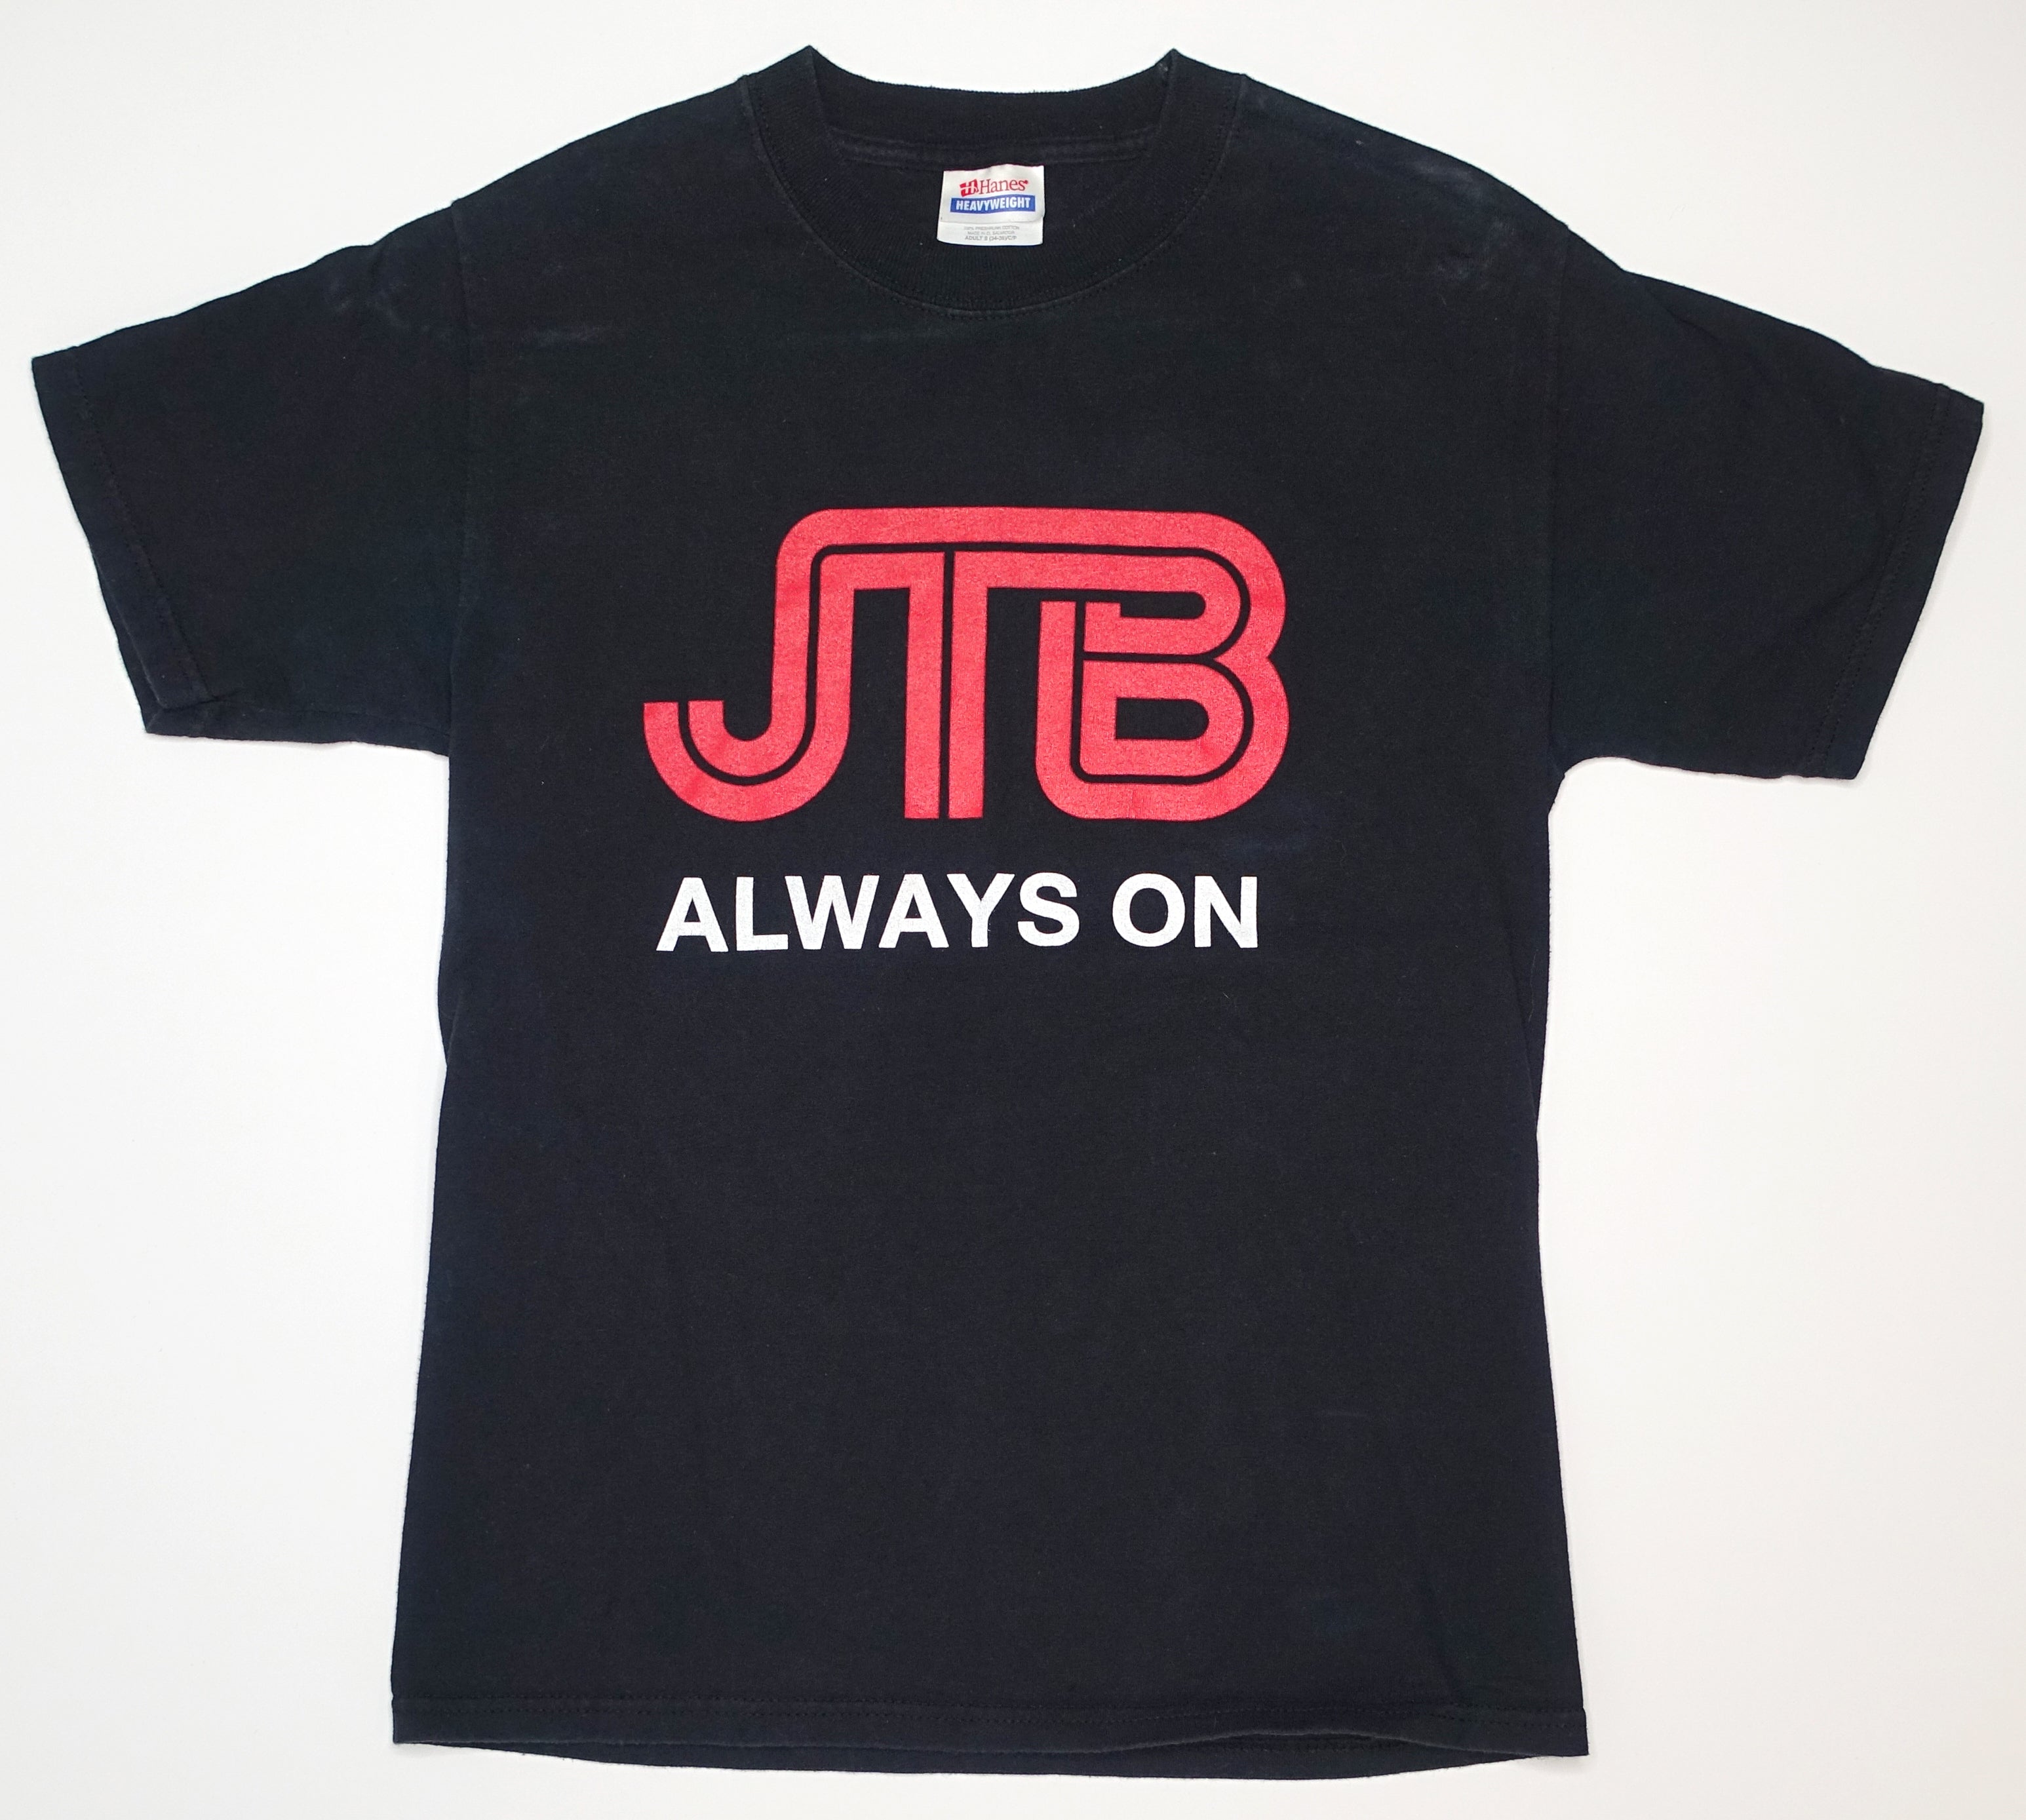 Jets To Brazil - JTB Always On 00's Tour Shirt Size Small